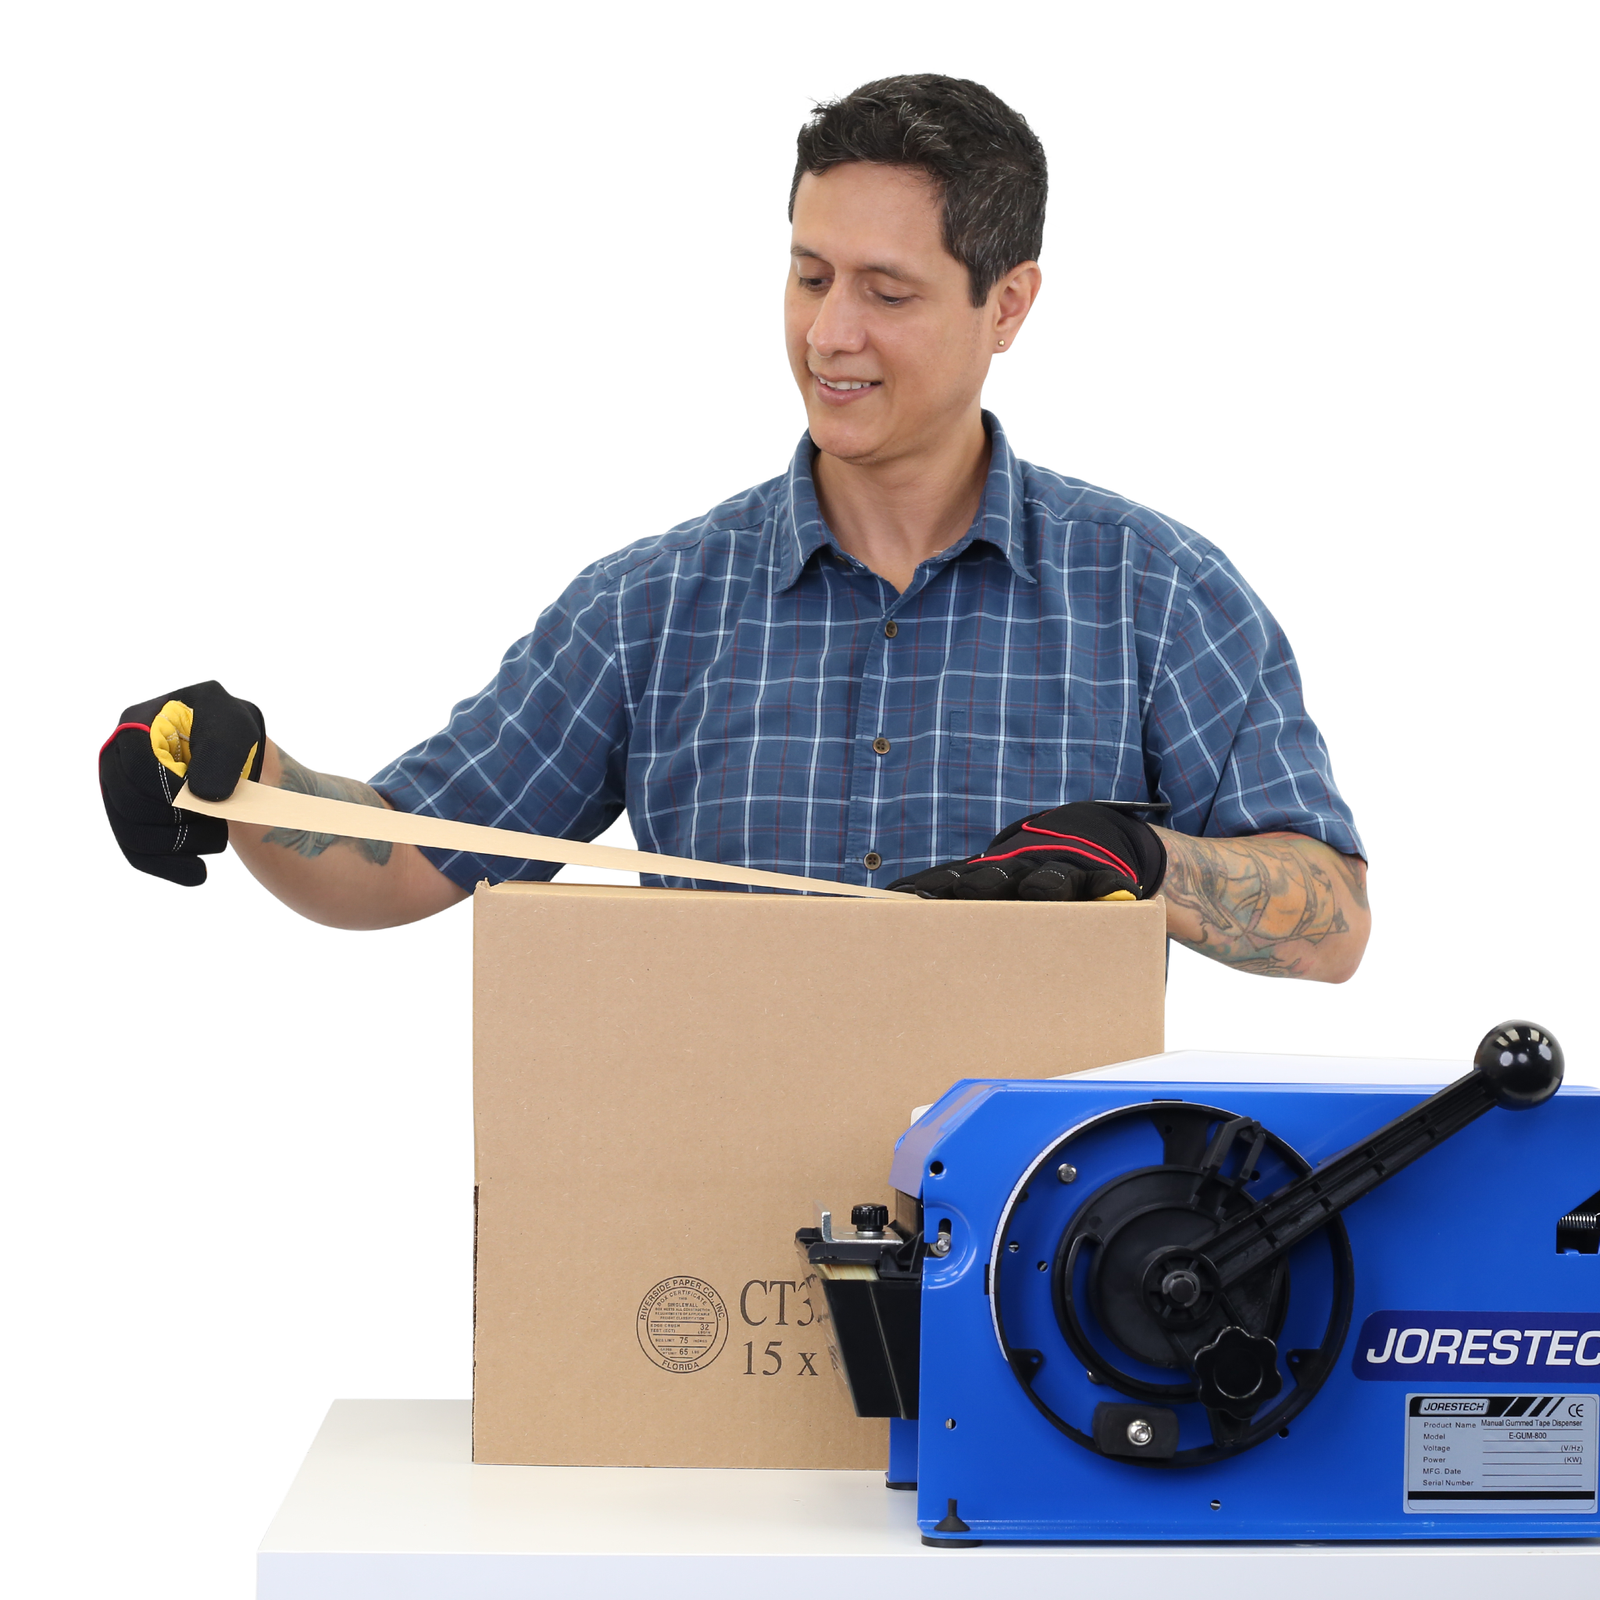 Man placing the wet gummed craft tape on to a brown card box after it was dispensed by the blue JORESTECH paper tape dispenser place on the same working table